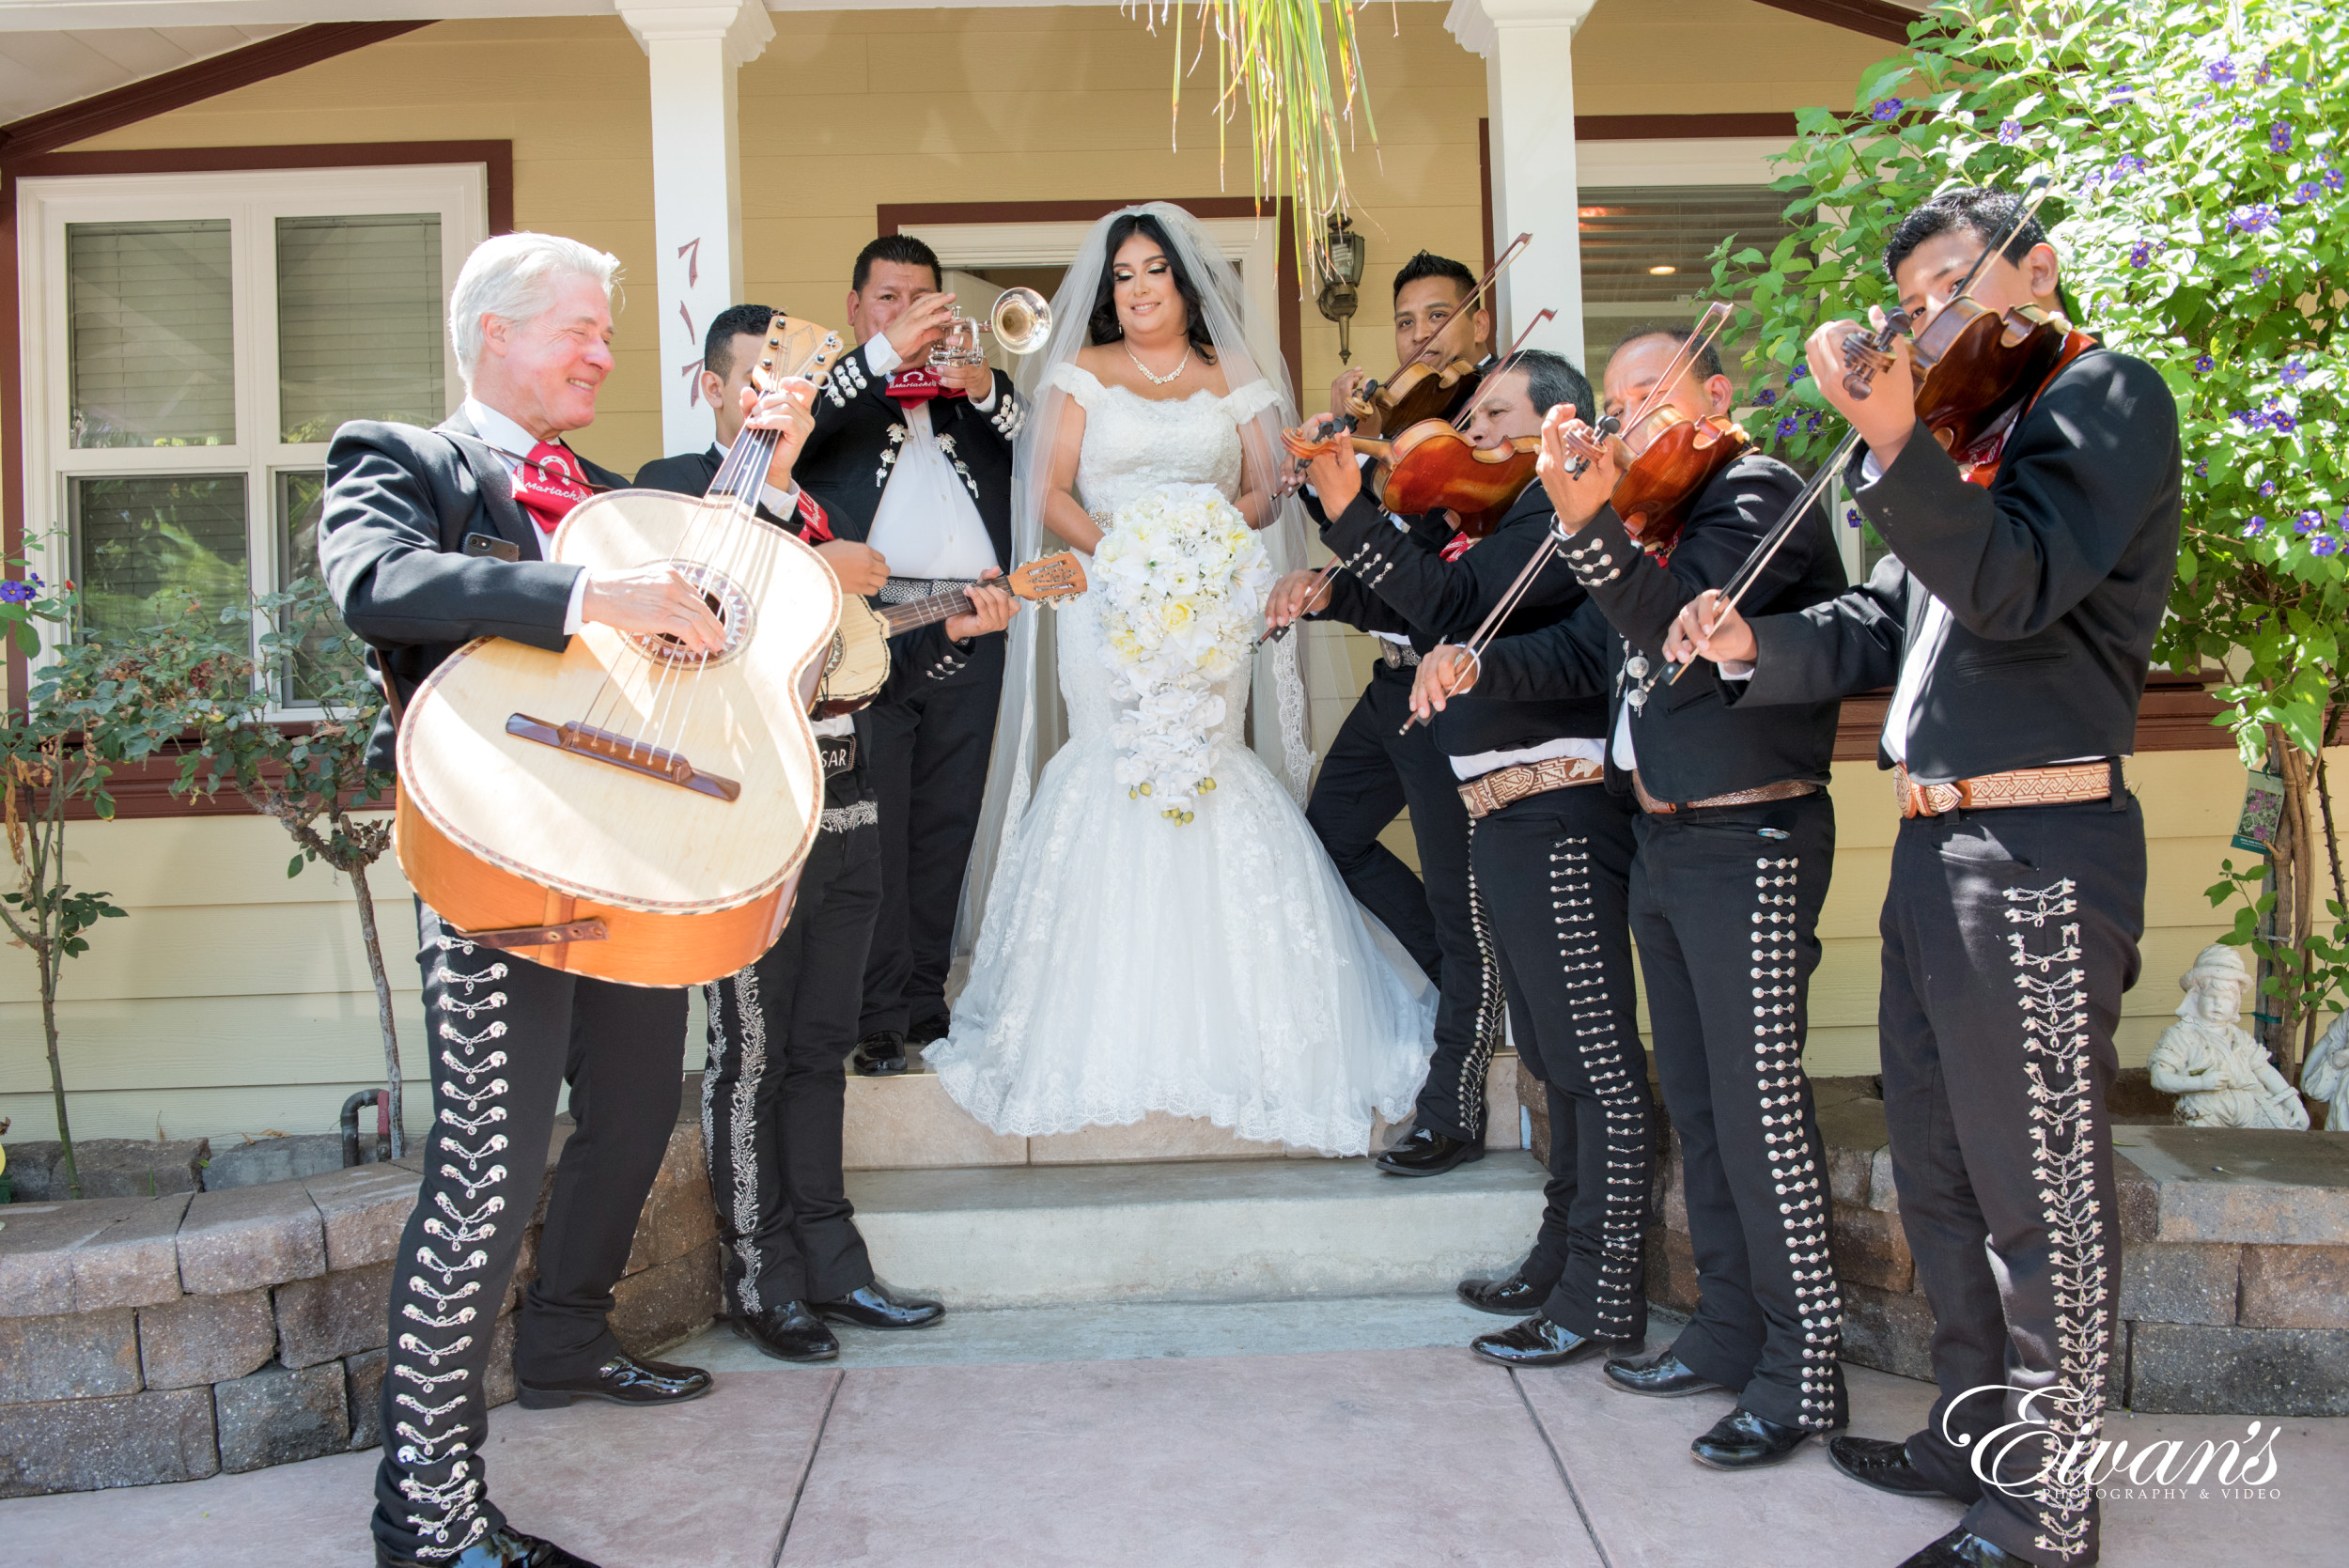 who pays for the wedding in mexico